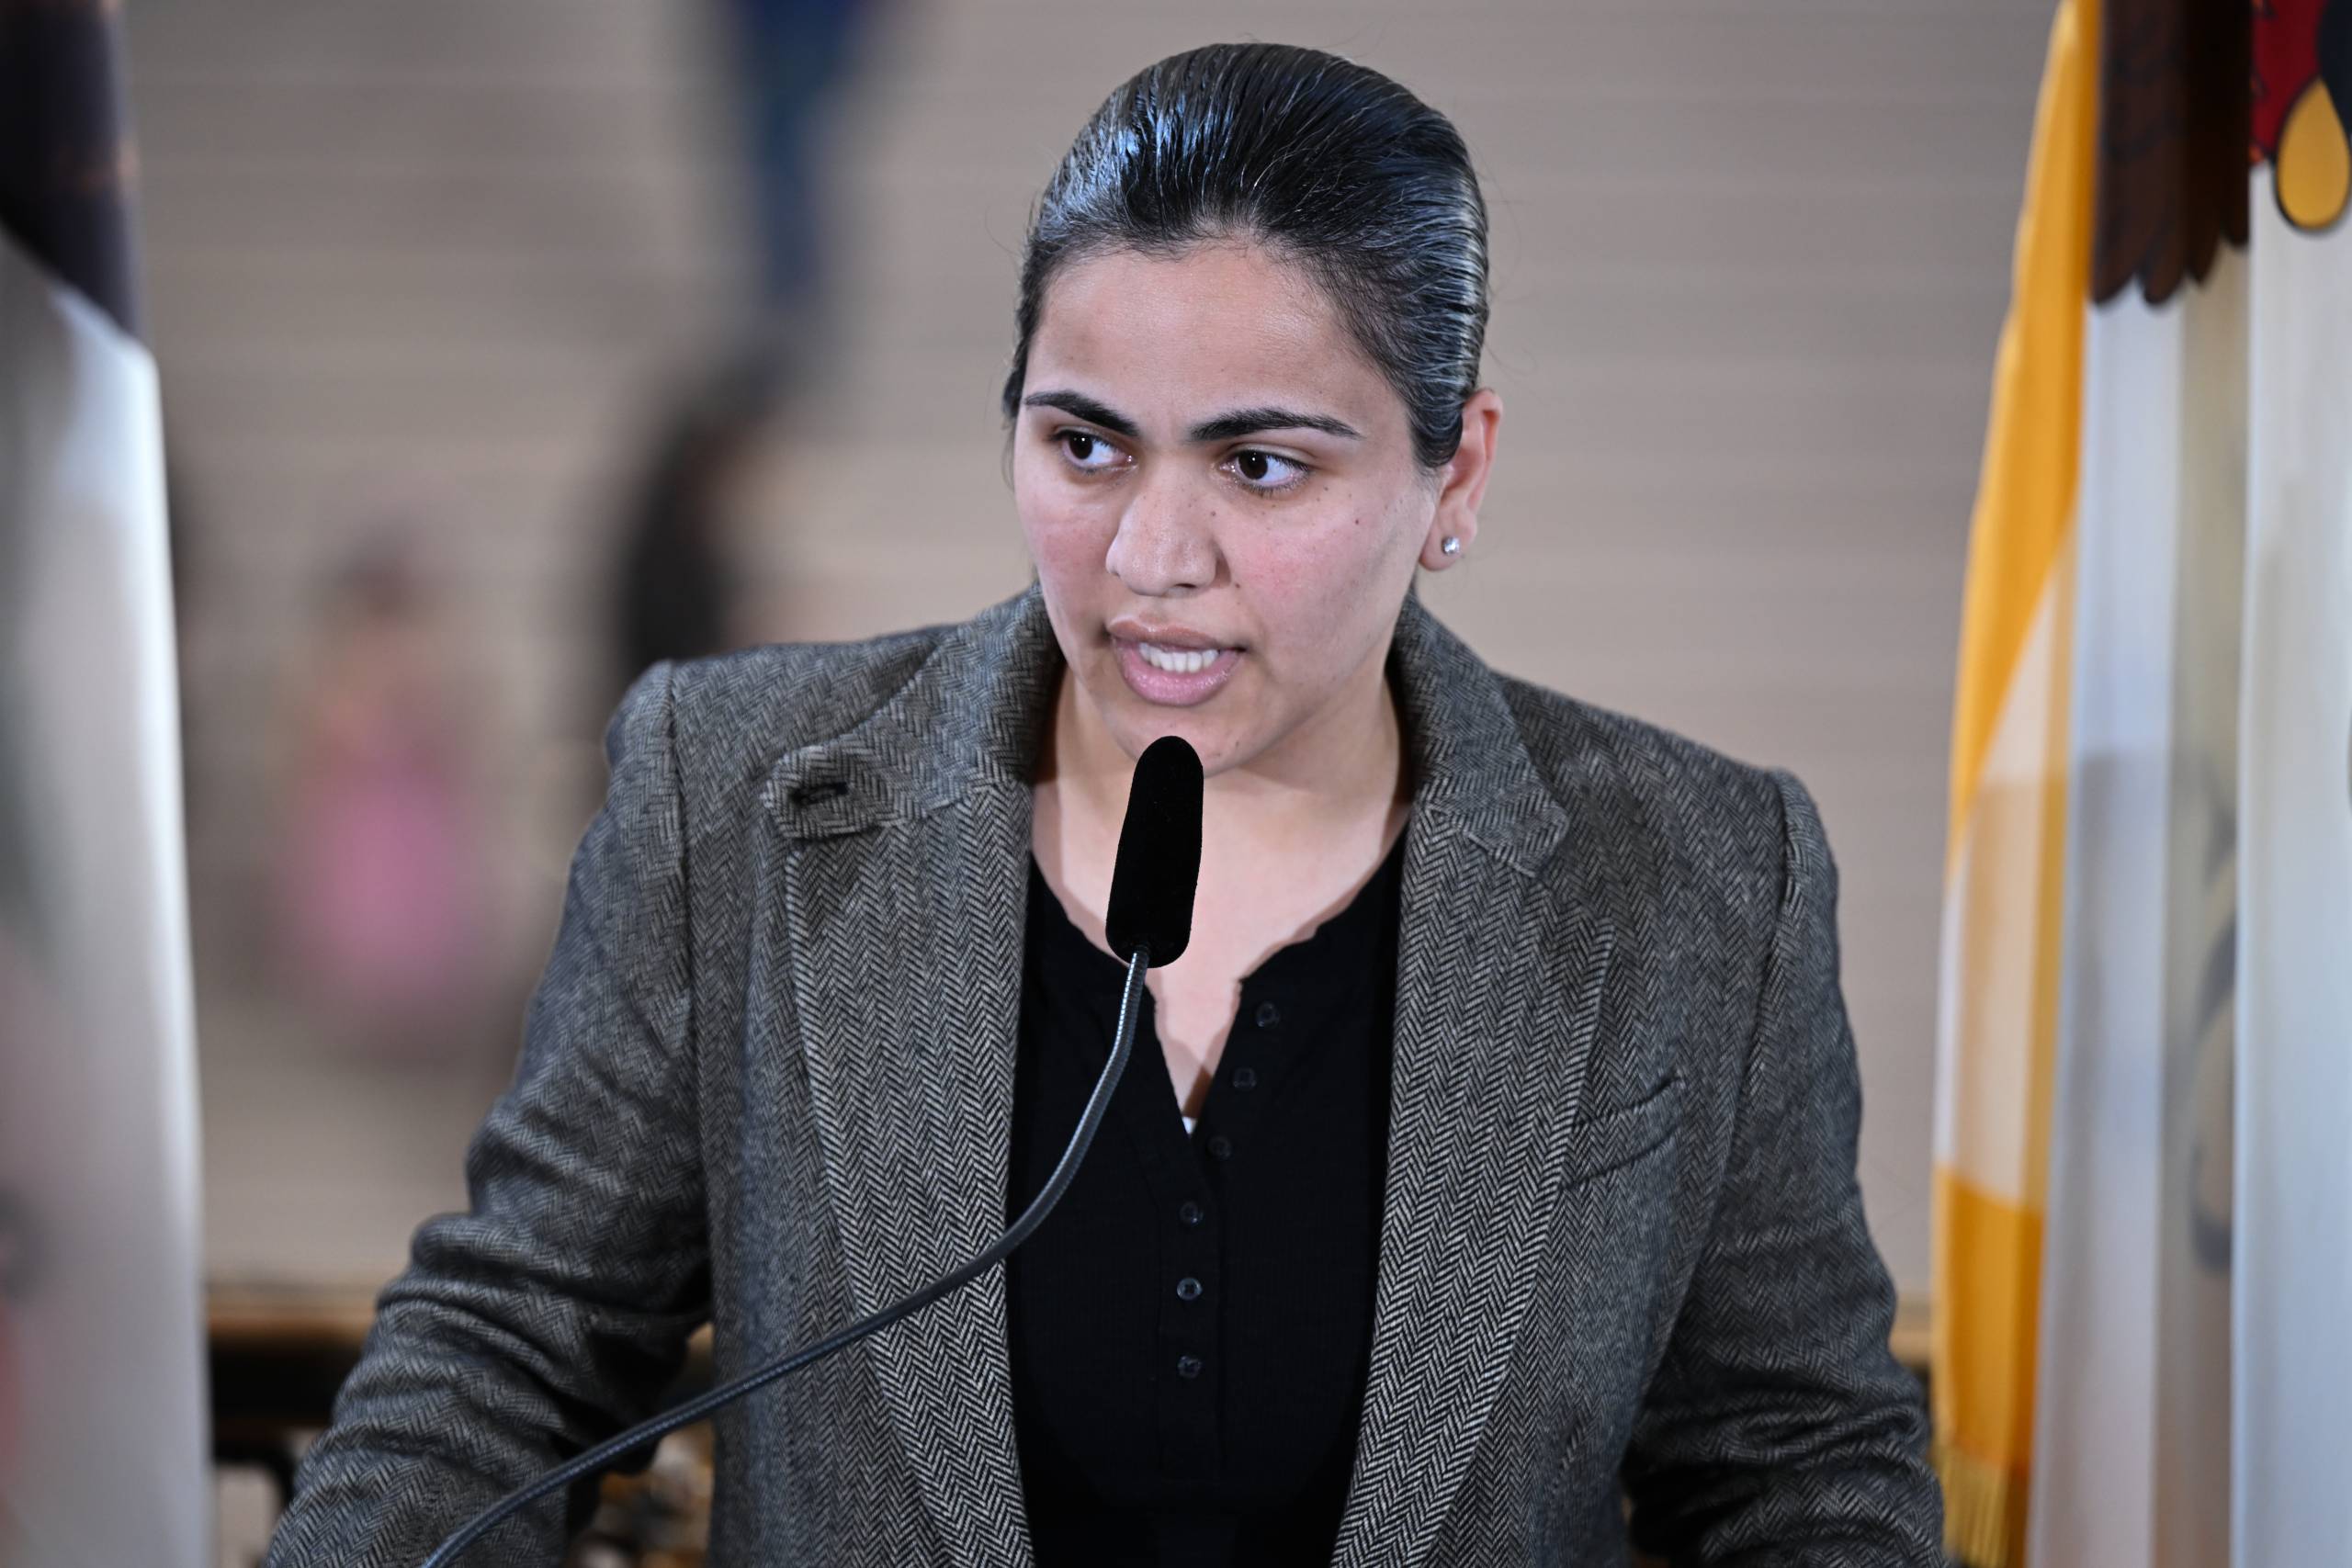 A South Asian woman in a gray suit speaks into a mic.